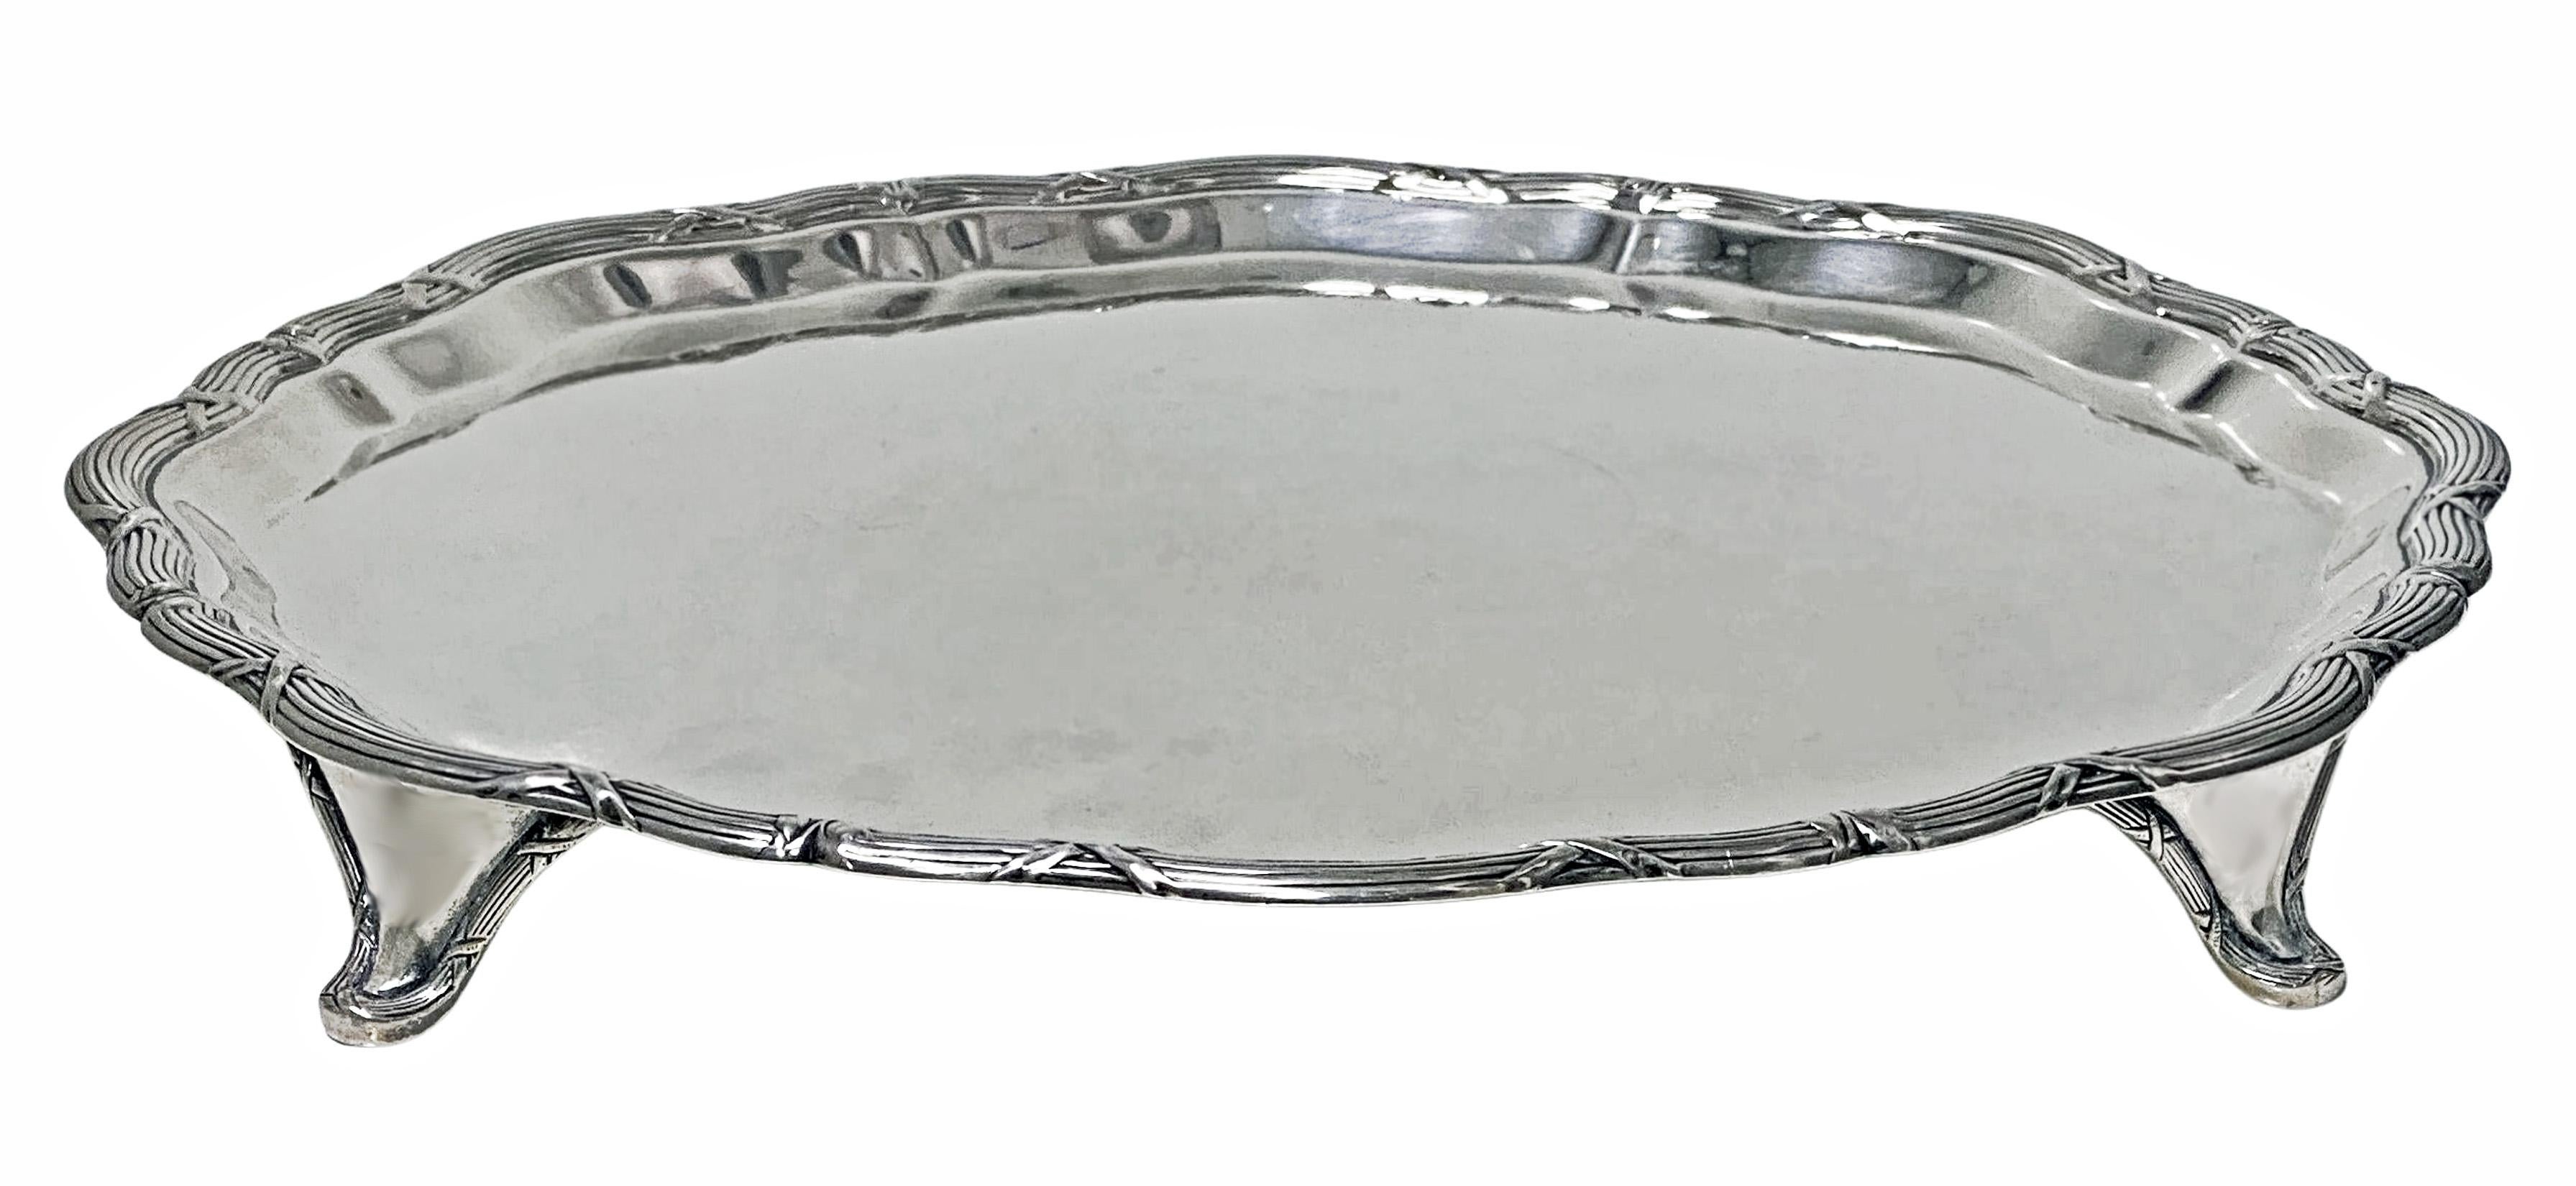 Antique Sterling Silver Salver Tray 1906 by J & J Maxfield Ltd. The Georgian style Salver of circular shape, reed and ribbon border on four turned supports plain centre. Diameter: Approximately 12 inches. Weight: Approximately 26.5 oz.